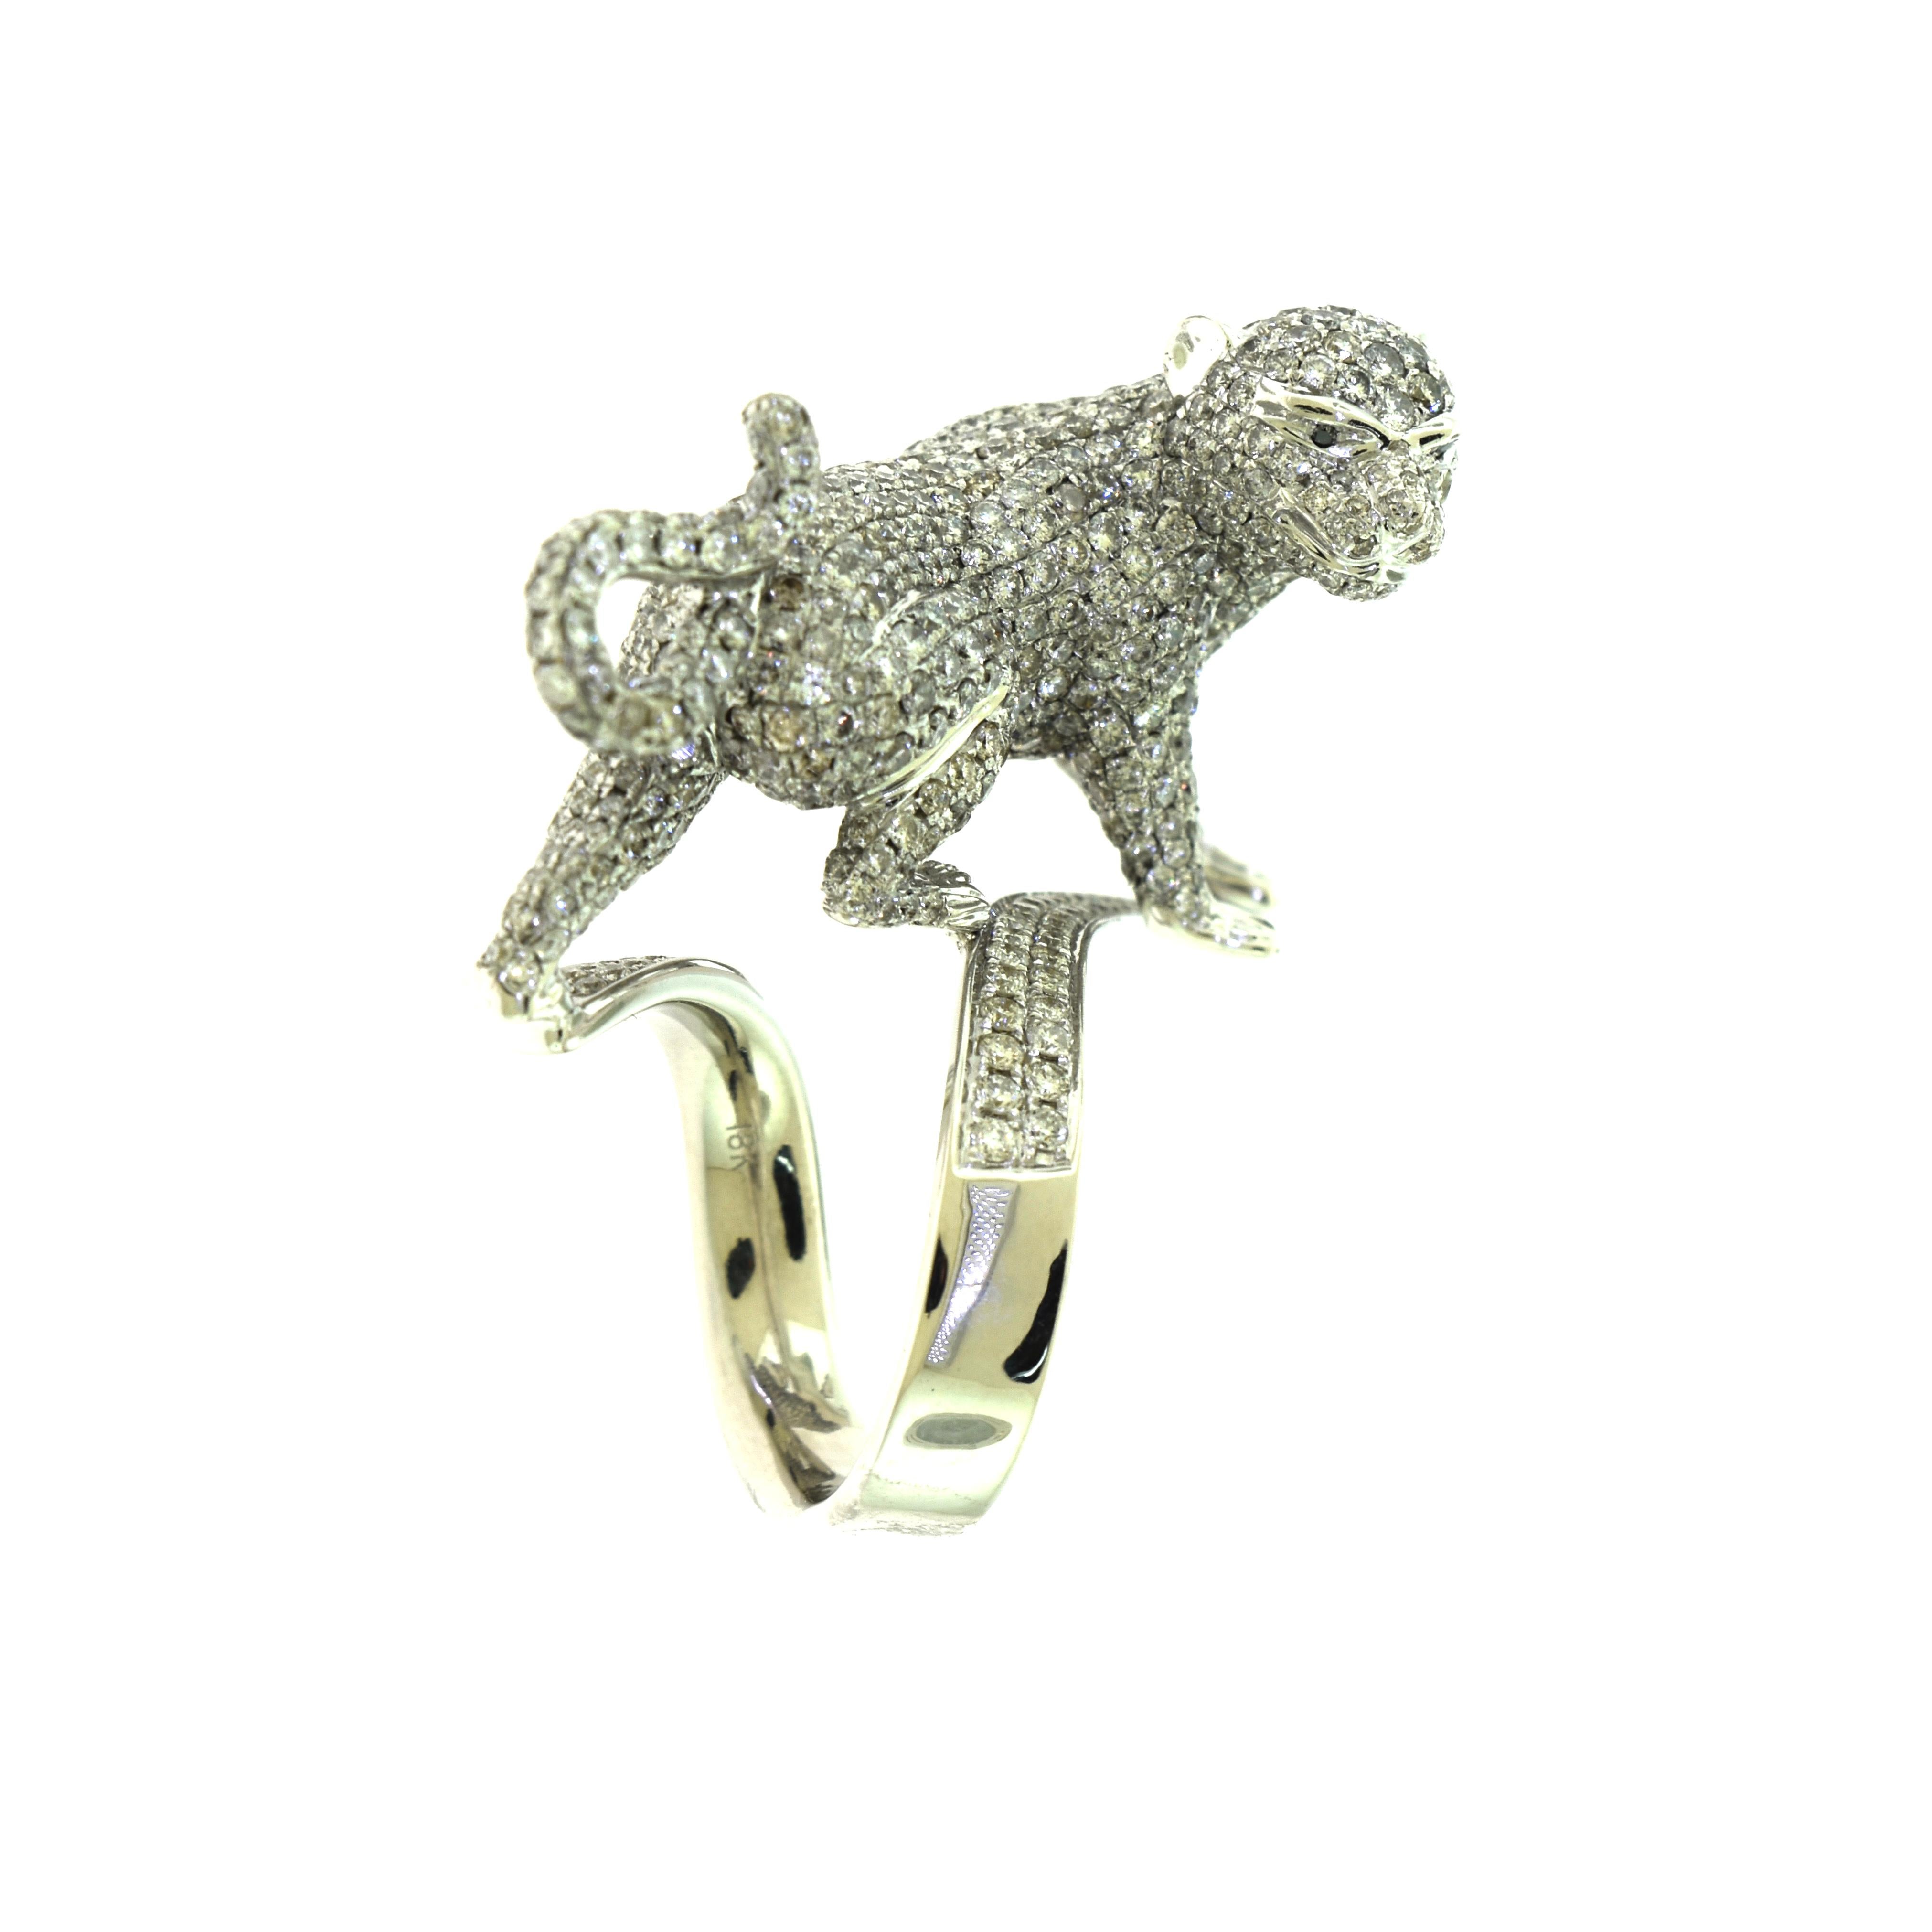 Diamond Paved Large Panther Cocktail Ring in White Gold, Sapphire Eyes 1